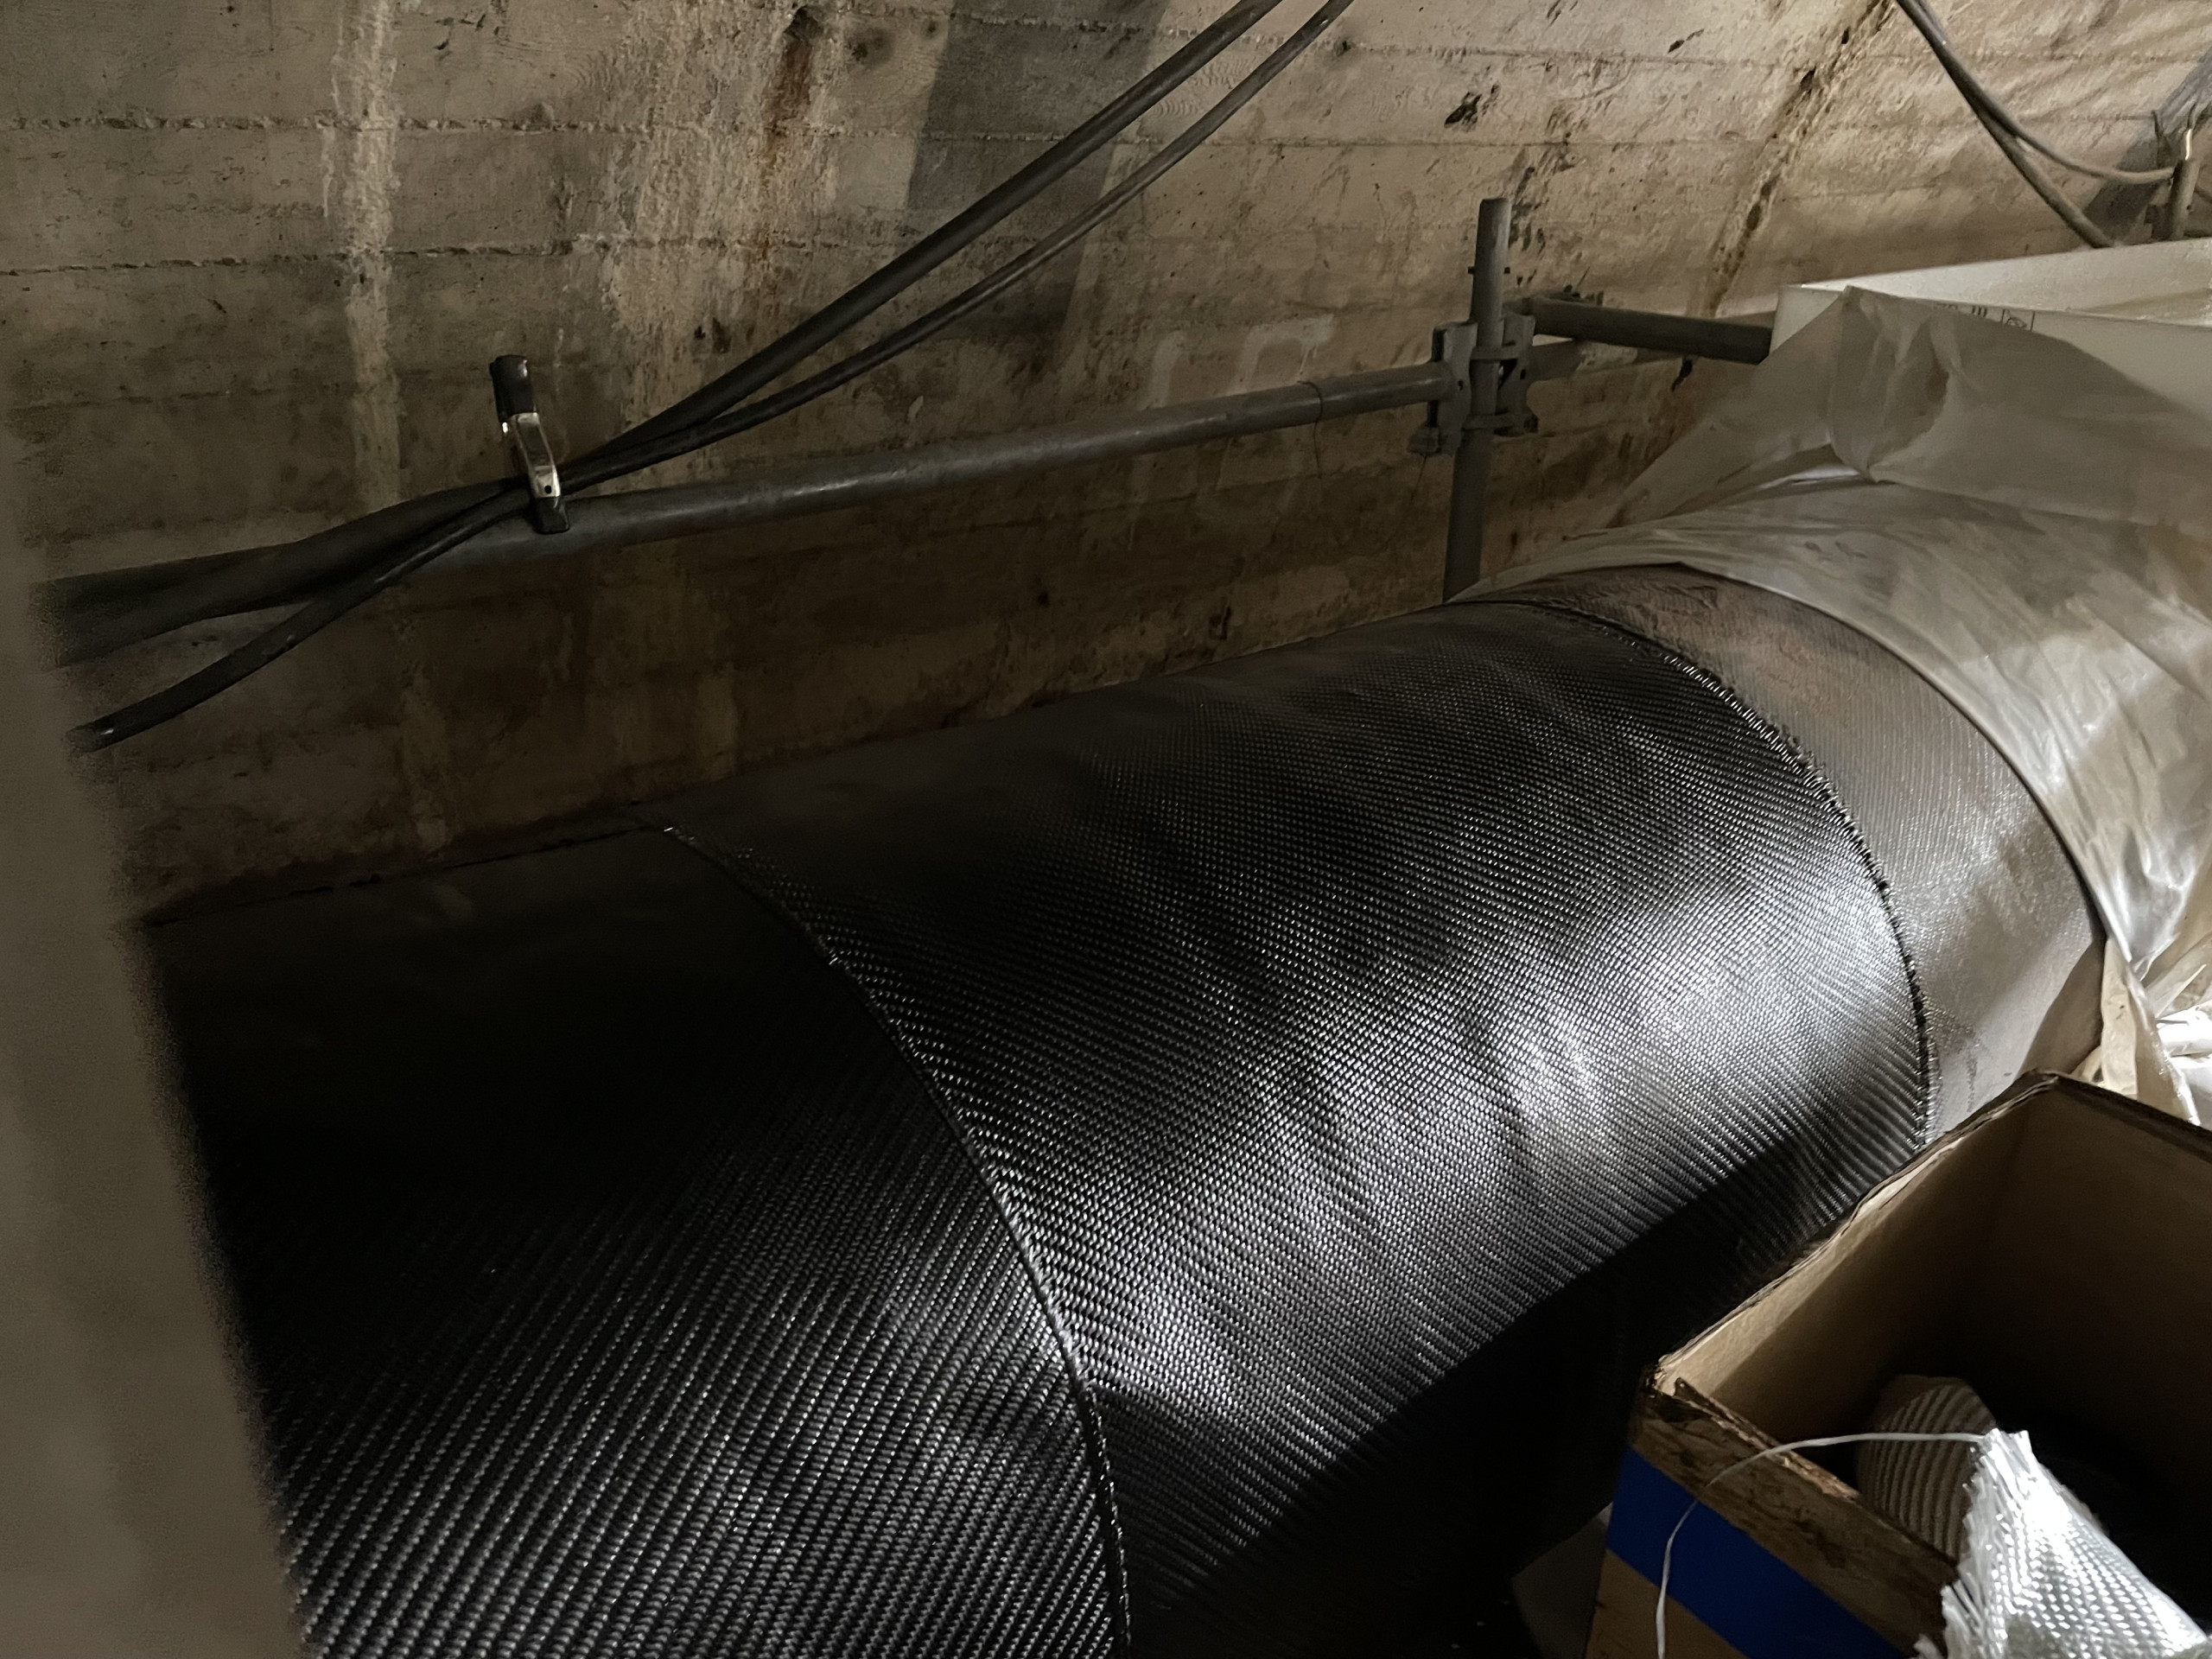 Picture of underground natural gas pipeline with successful composite wrap repair applied.